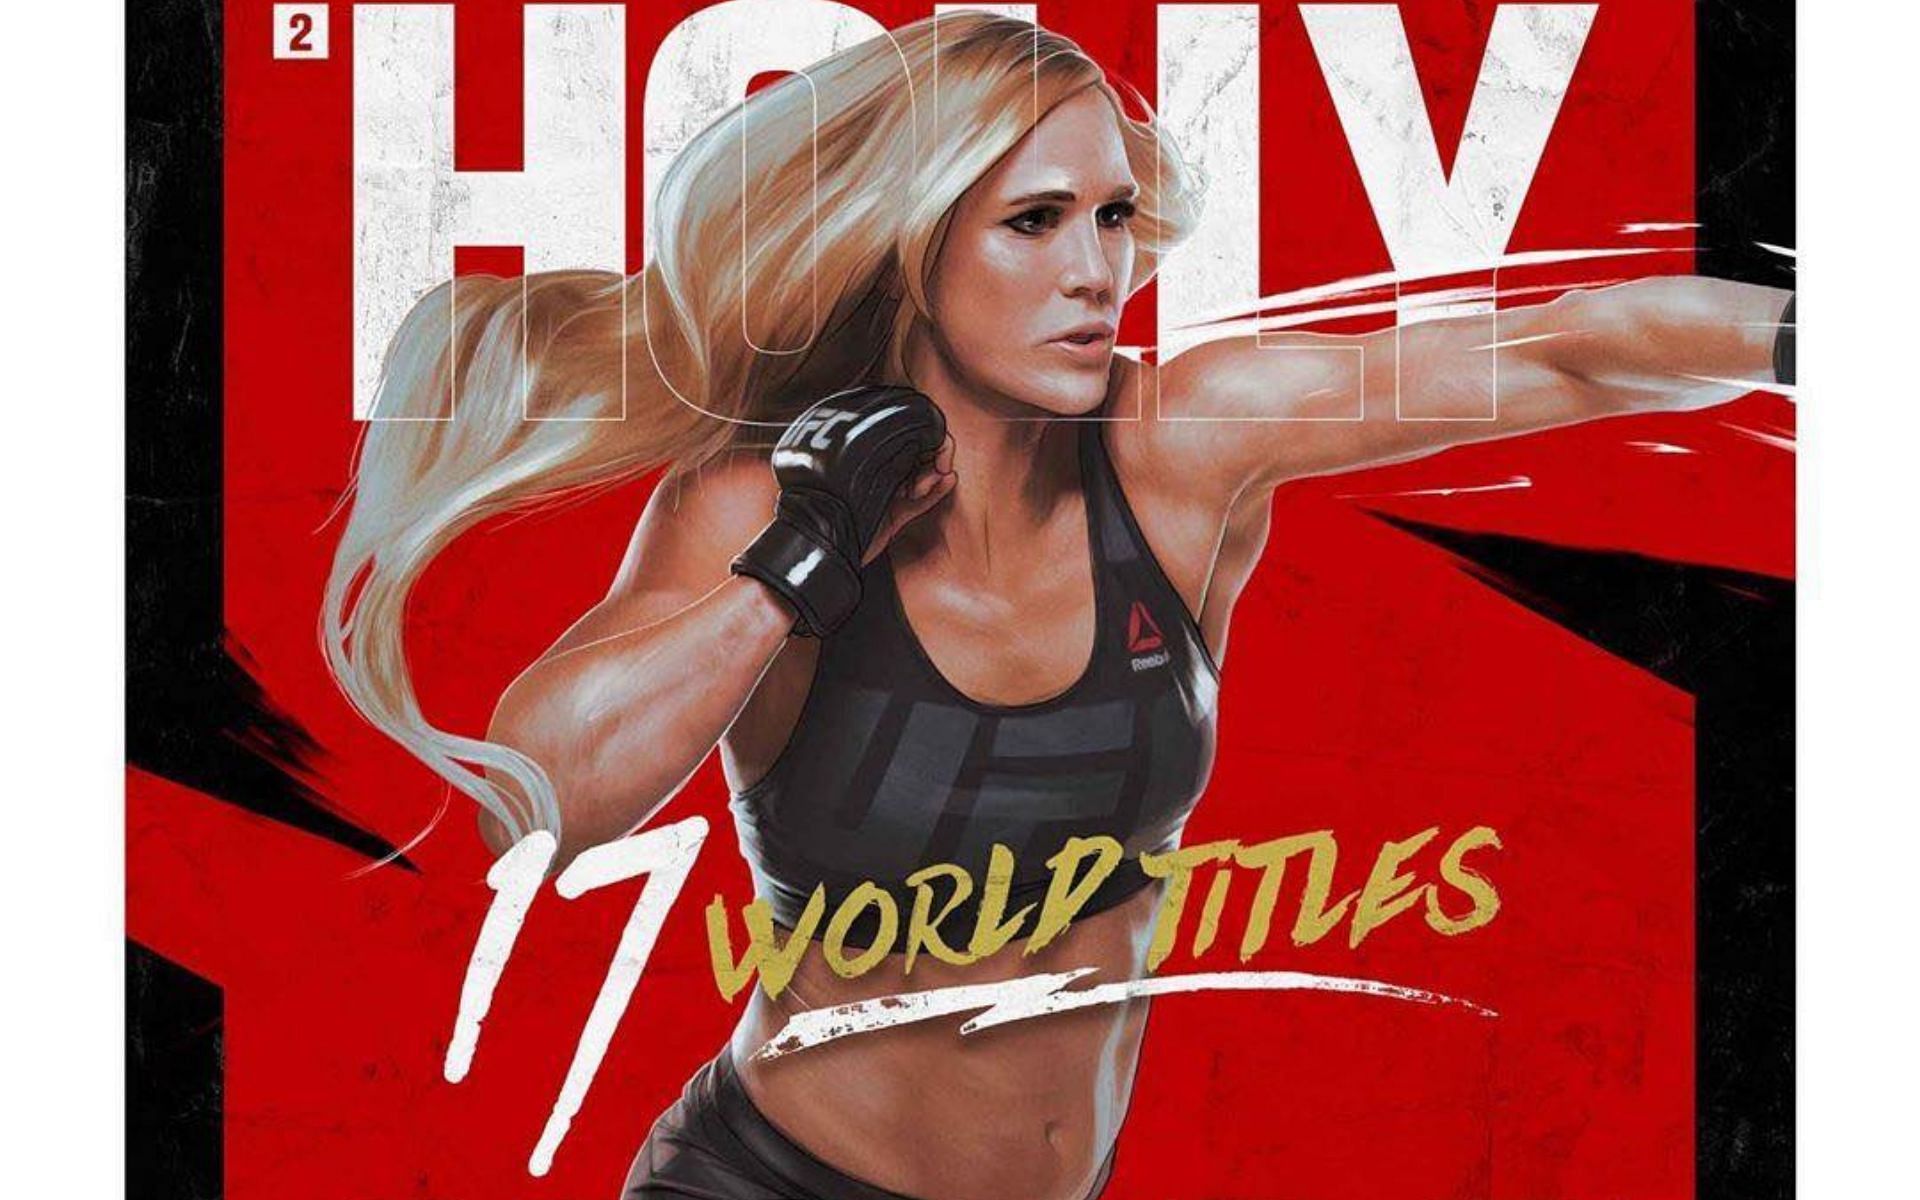 Graphic for the former champion, Holly Holm (photo from @hollyholm via Instagram)